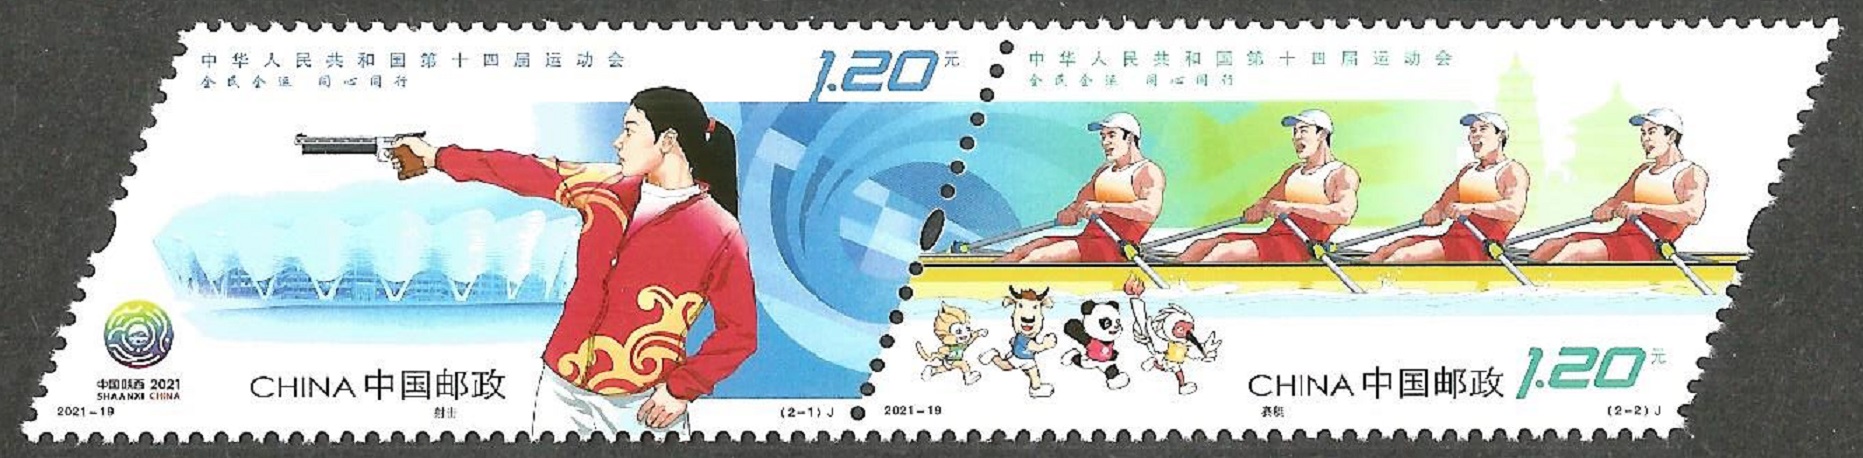 Stamp CHN 2021 Sept. 15th The 14th Games of the Peoples Republic o China Shaanxi II